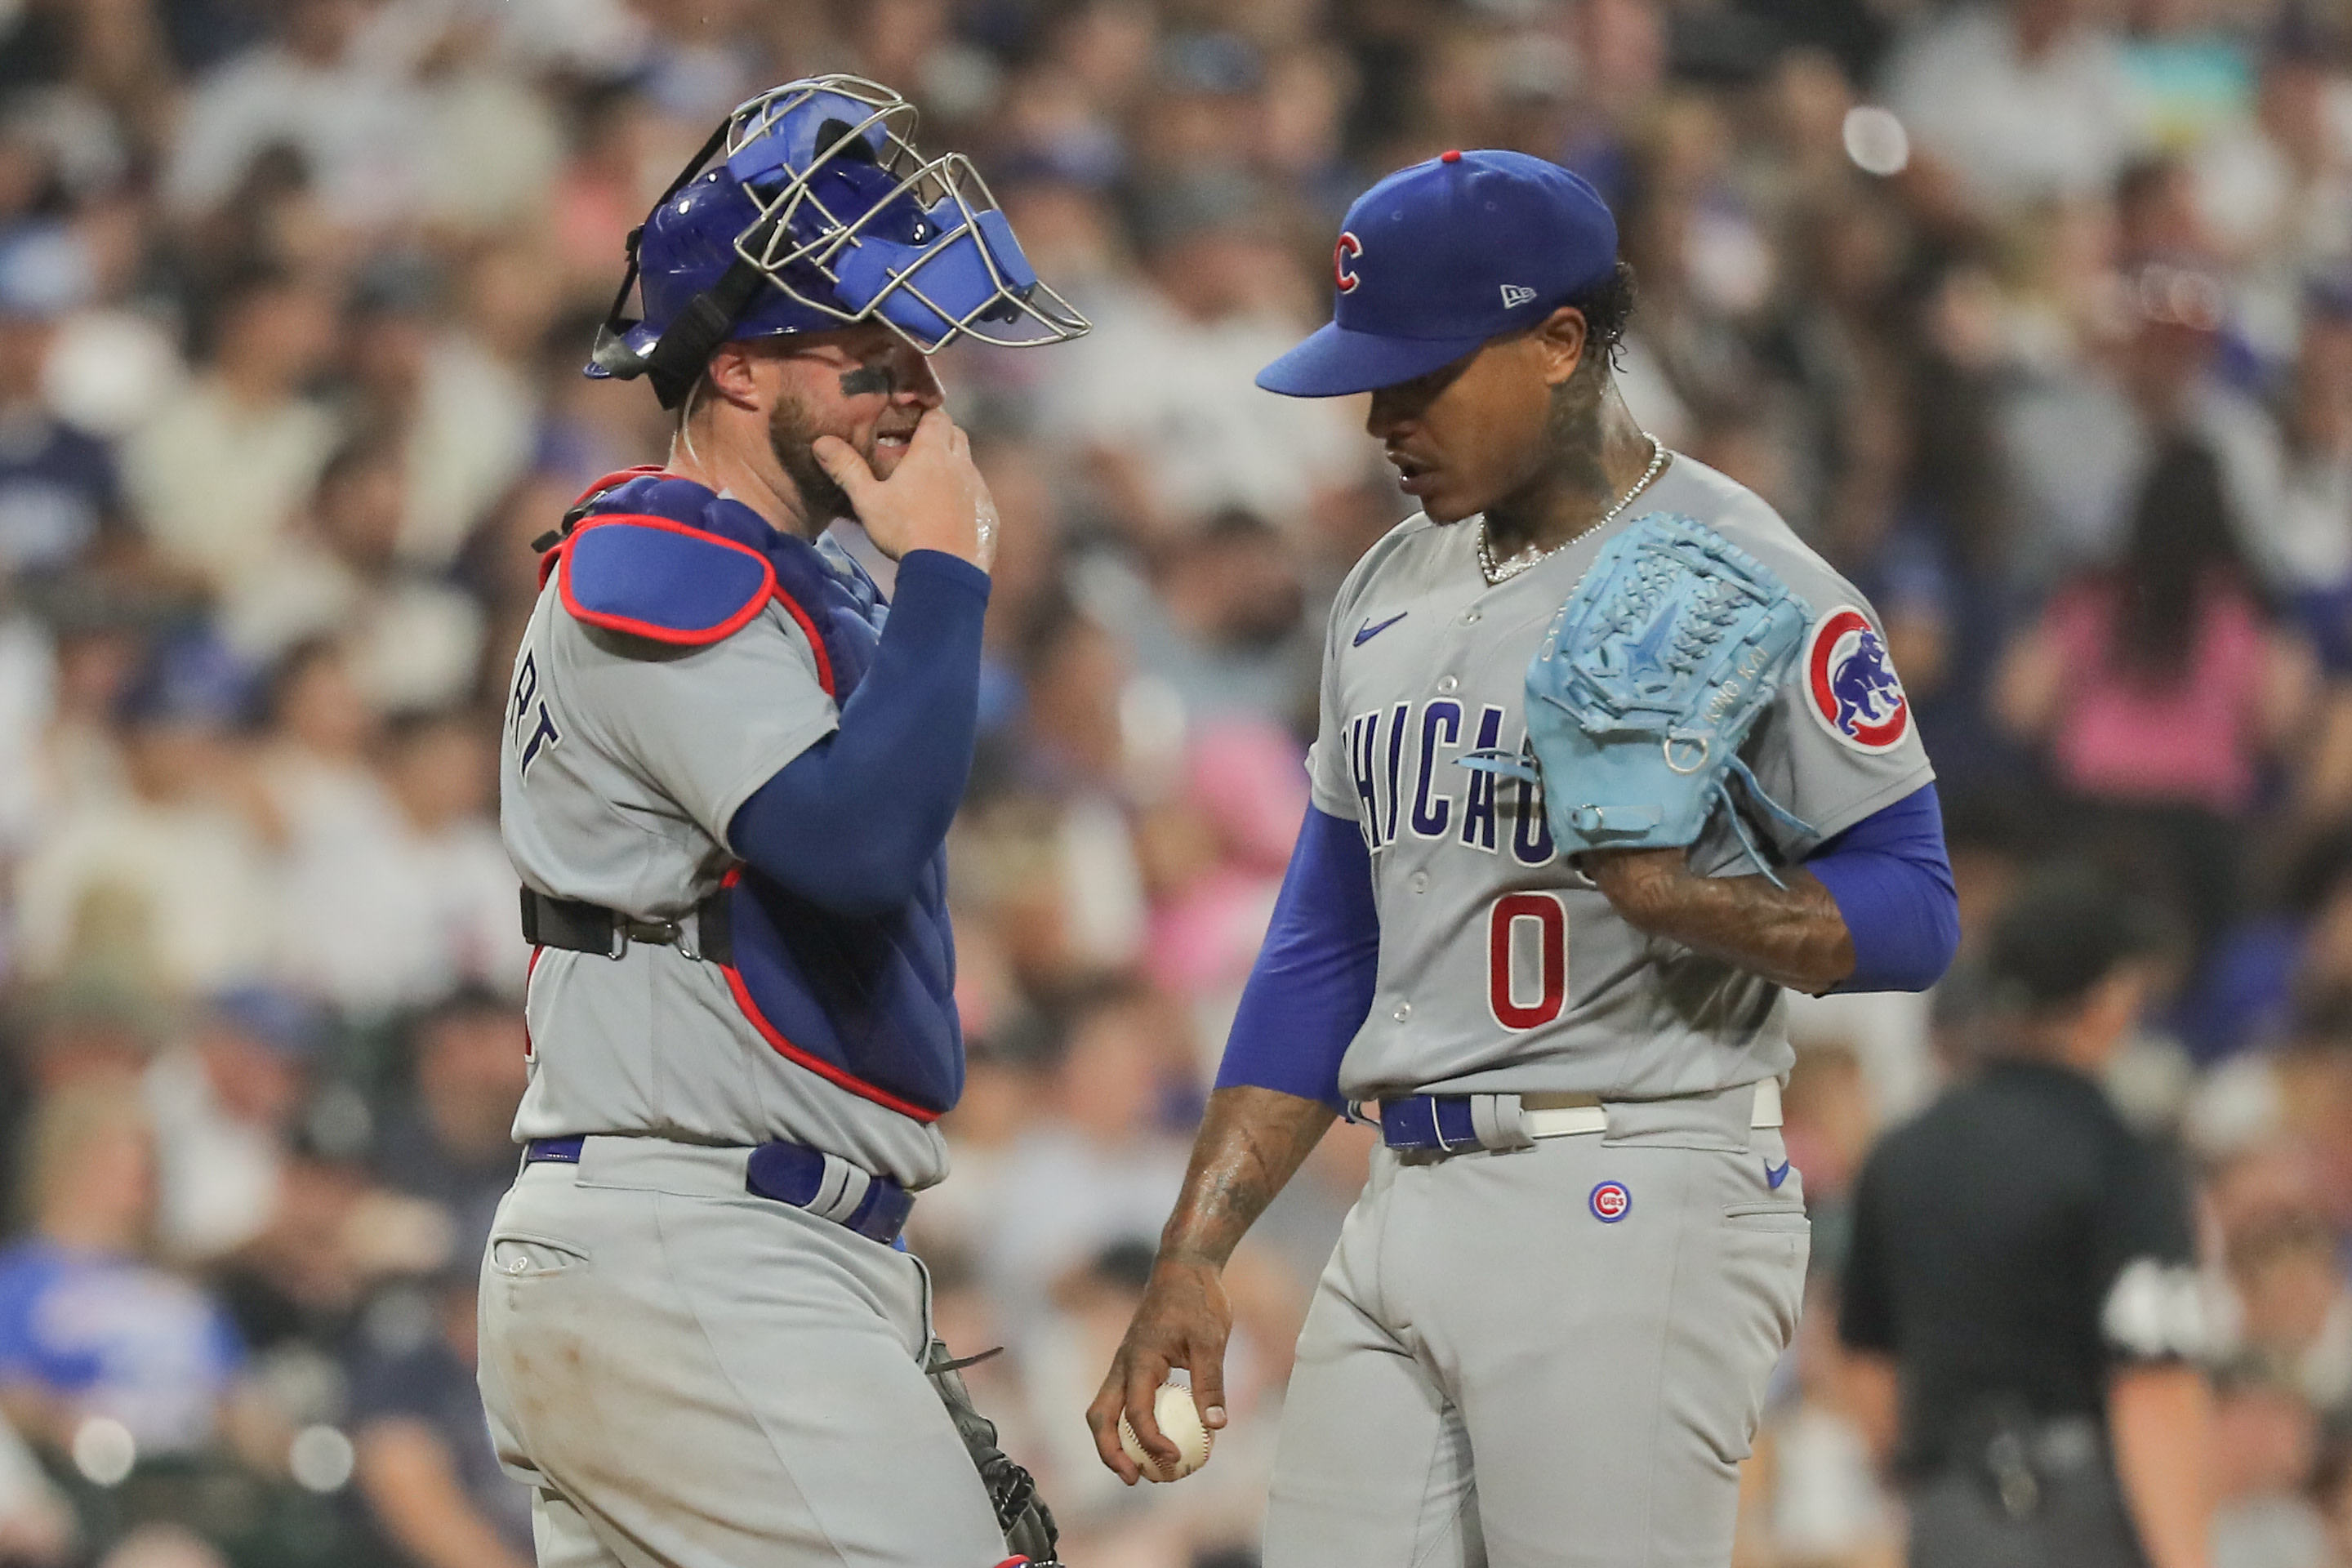 Swanson and Candelario go deep as the Cubs hold off the Braves 8-6